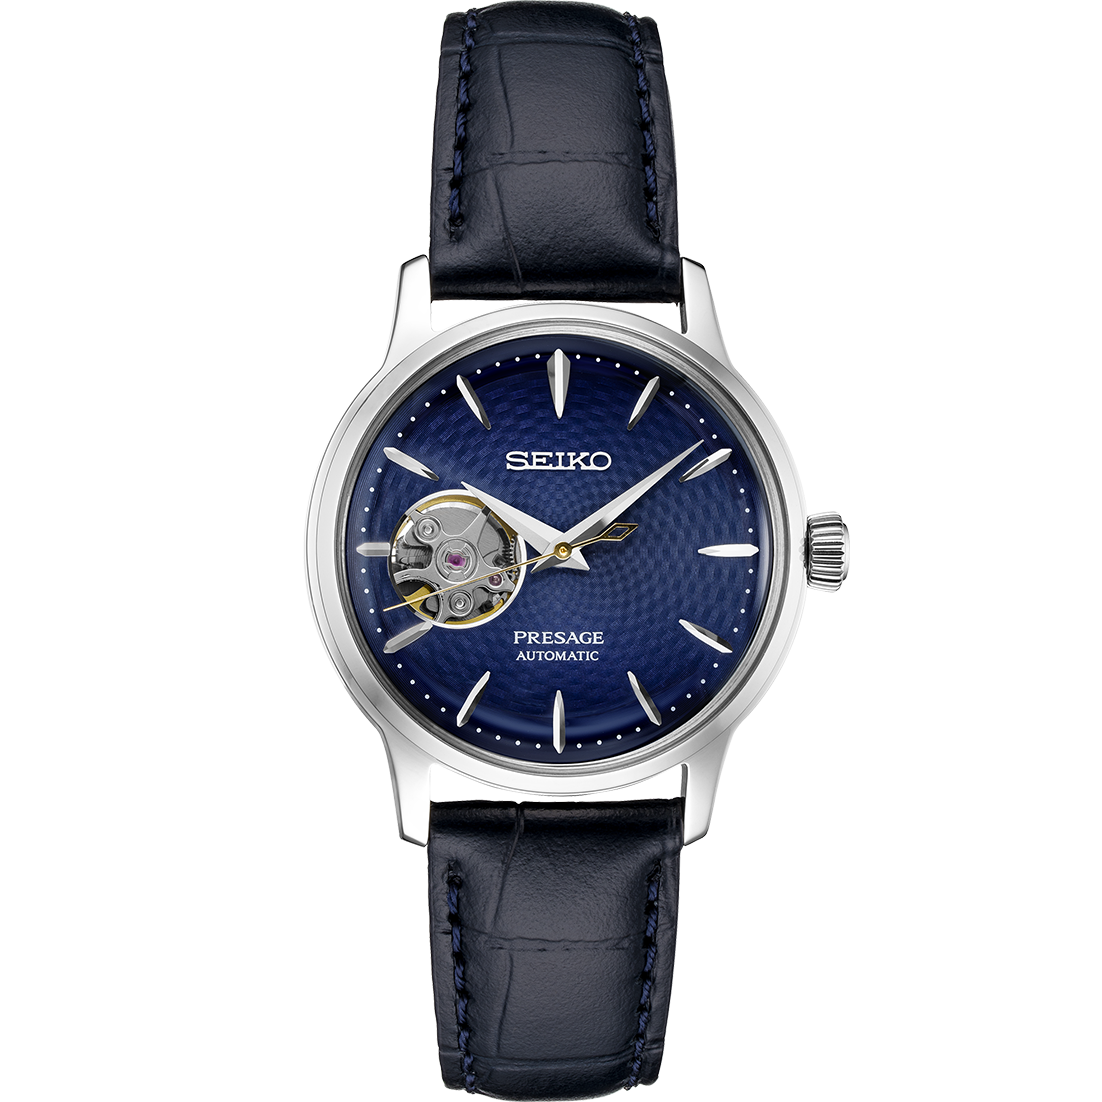 Ladies Seiko #SSA785 Presage Blue Automatic Dress Watch with Open Heart